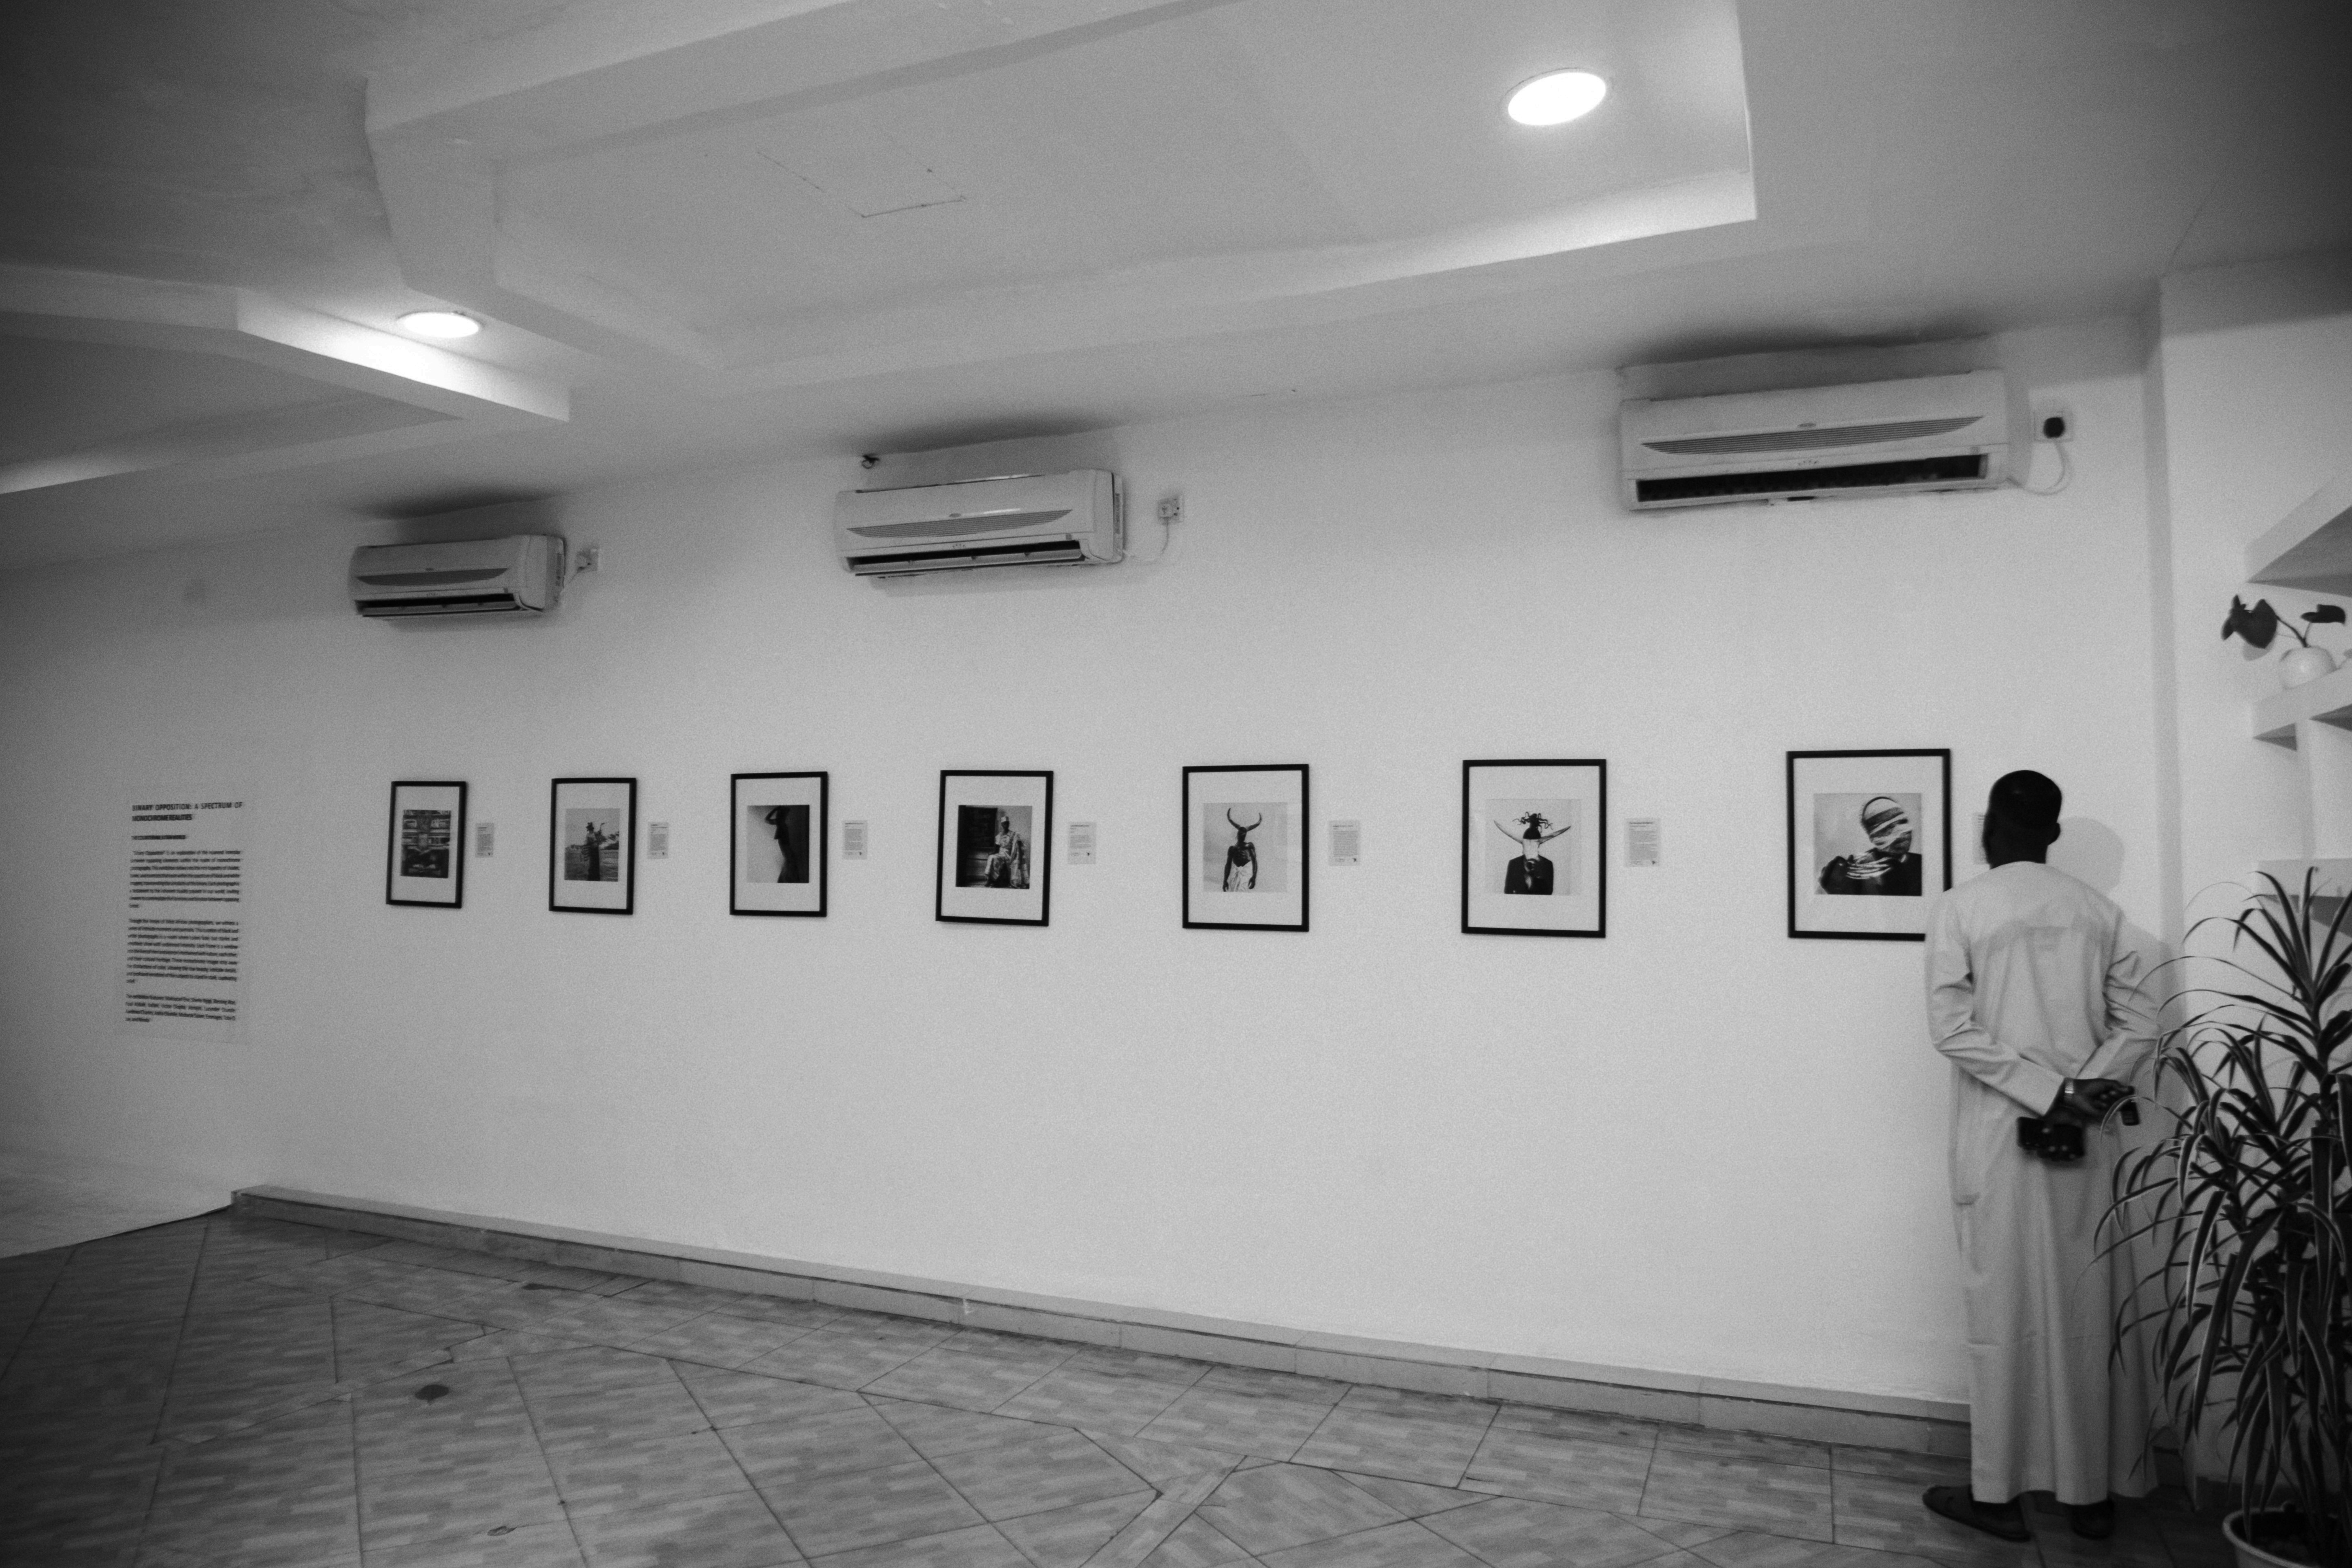 Photography from exhibition opening by Itohan Okoh (@Itohantheartist)